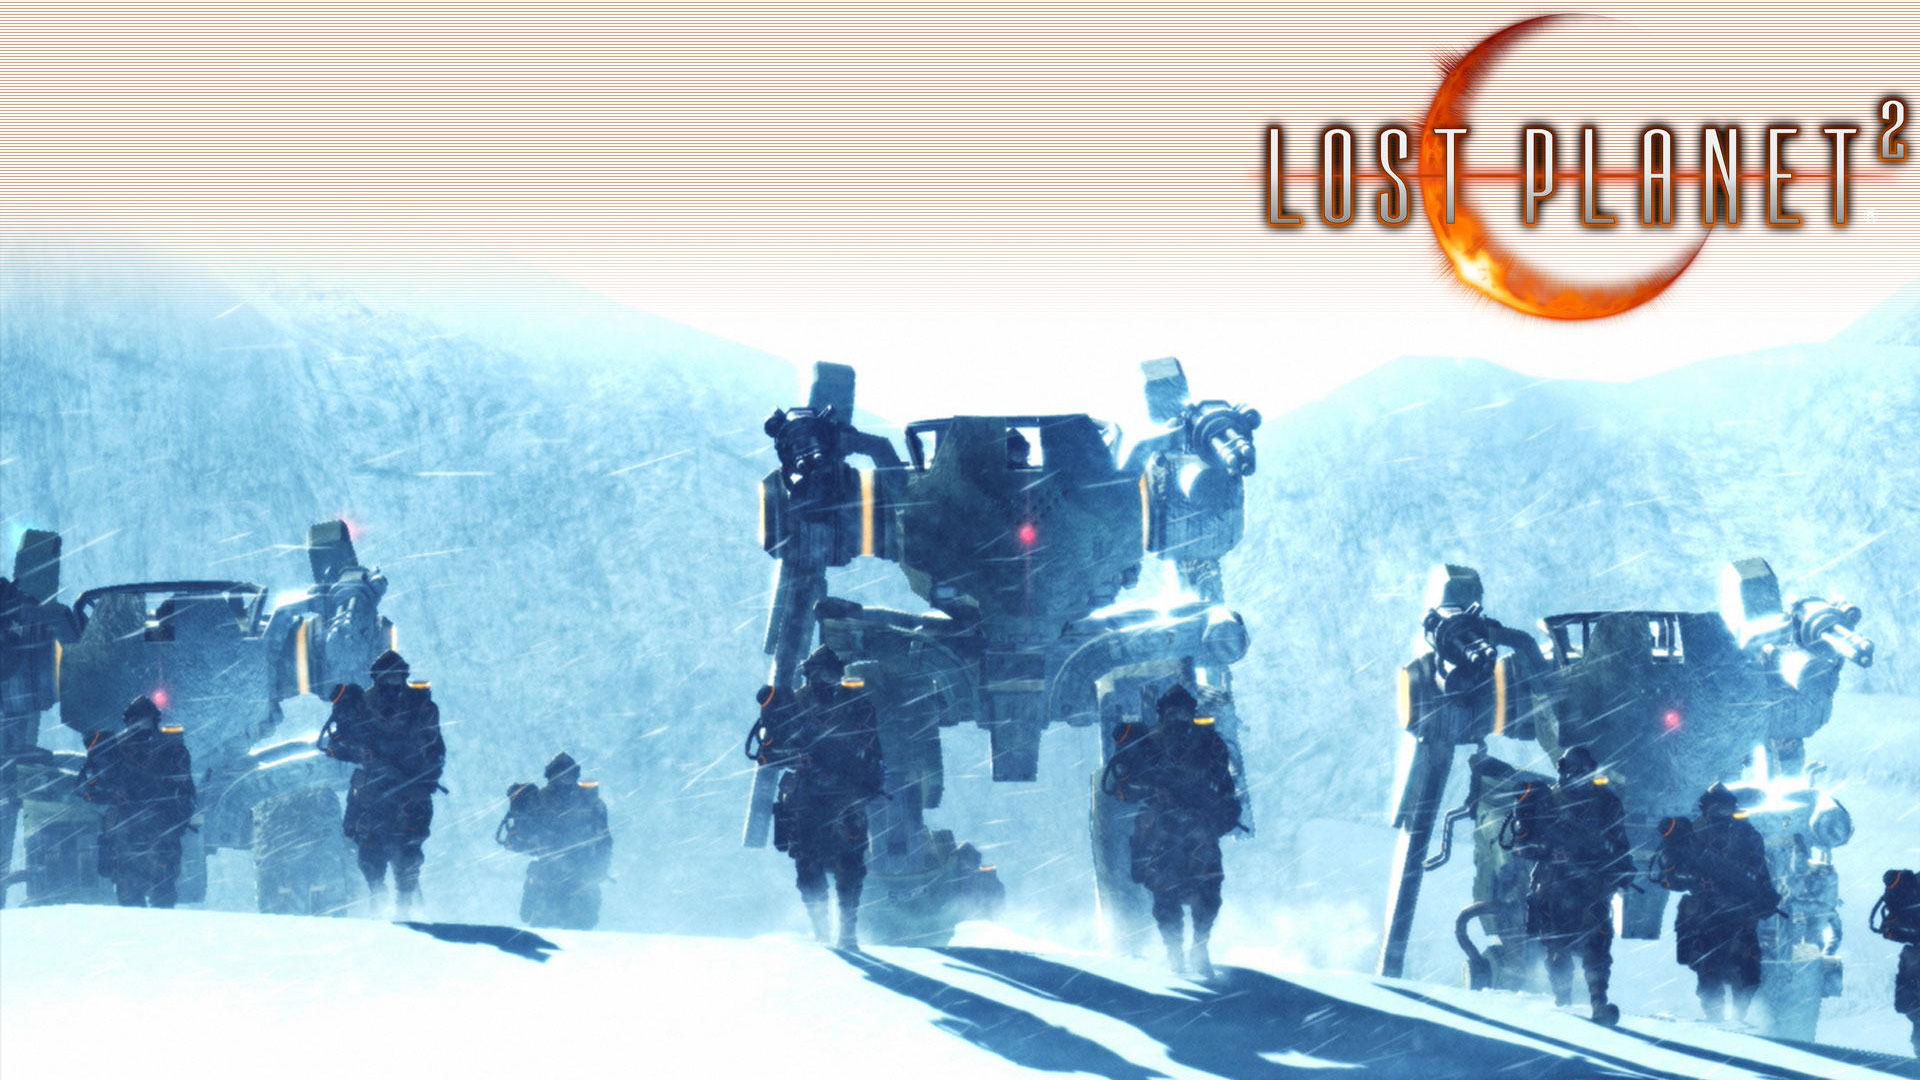  wallpapers of Lost Planet 2 You are downloading Lost Planet 2 1920x1080